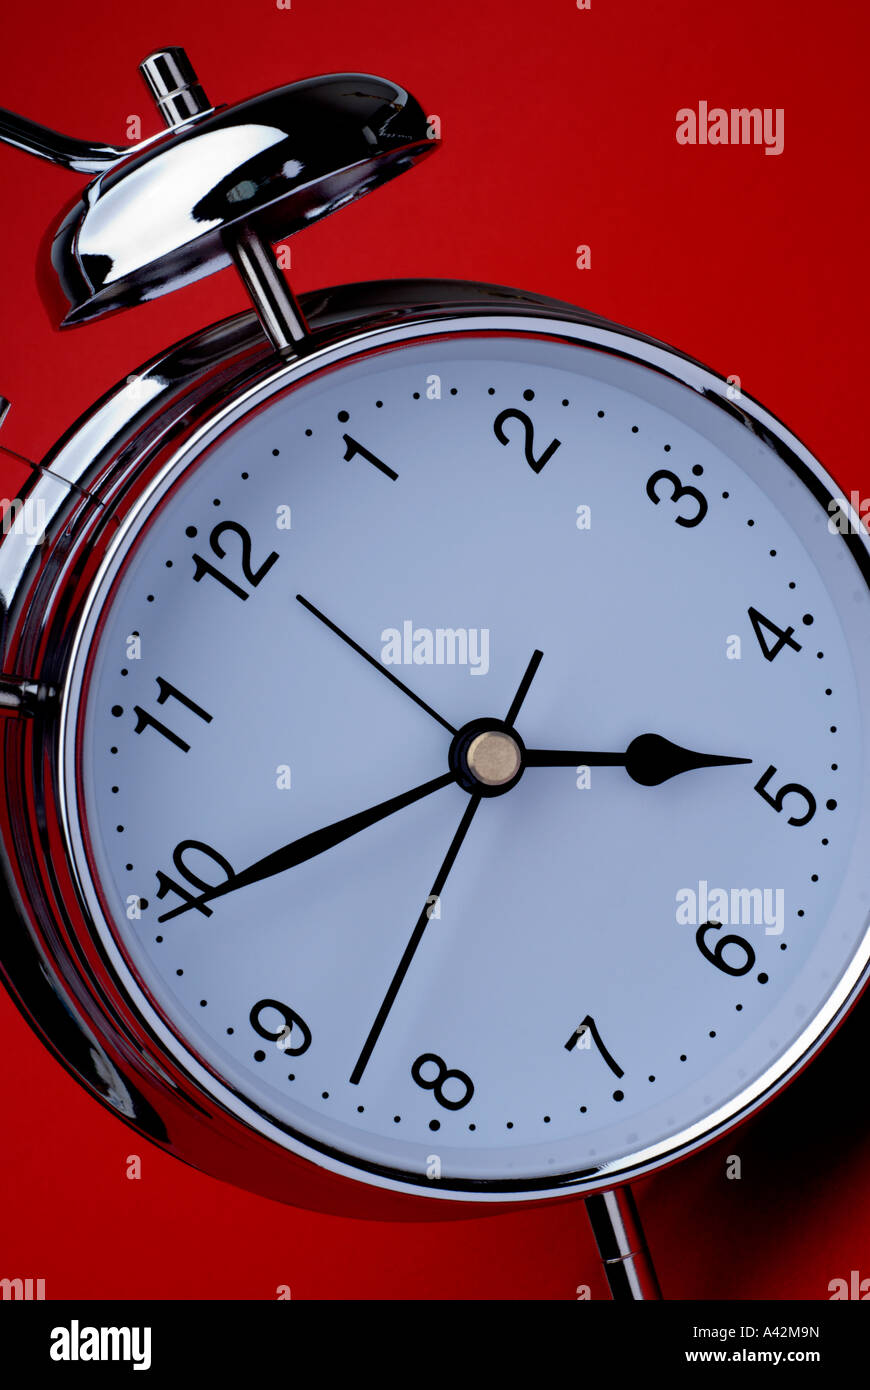 Clock at angle with silver alarm bell on red background Stock Photo